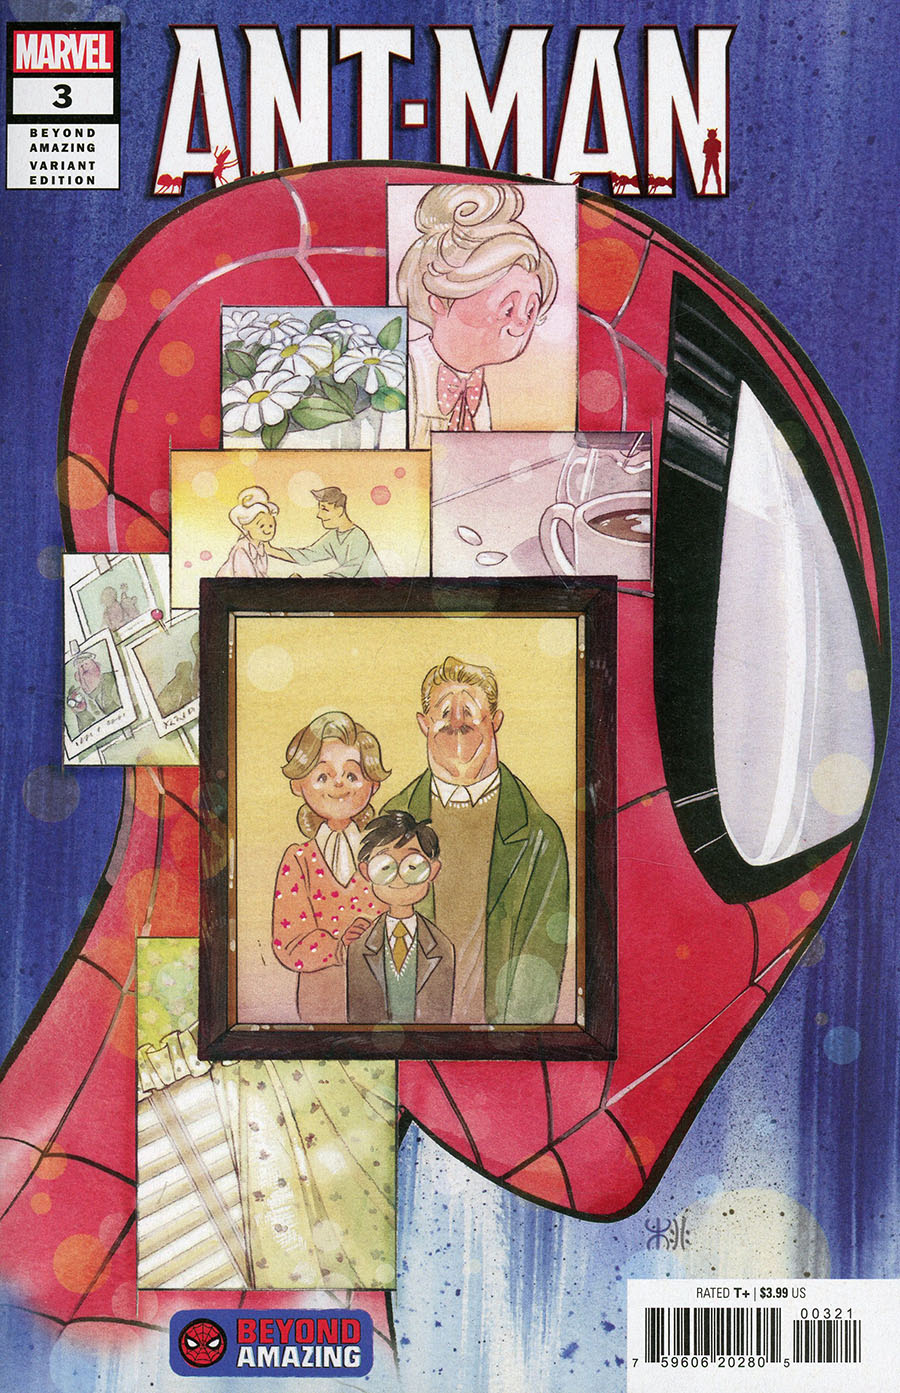 Ant-Man Vol 3 #3 Cover B Variant Peach Momoko Beyond Amazing Spider-Man Cover